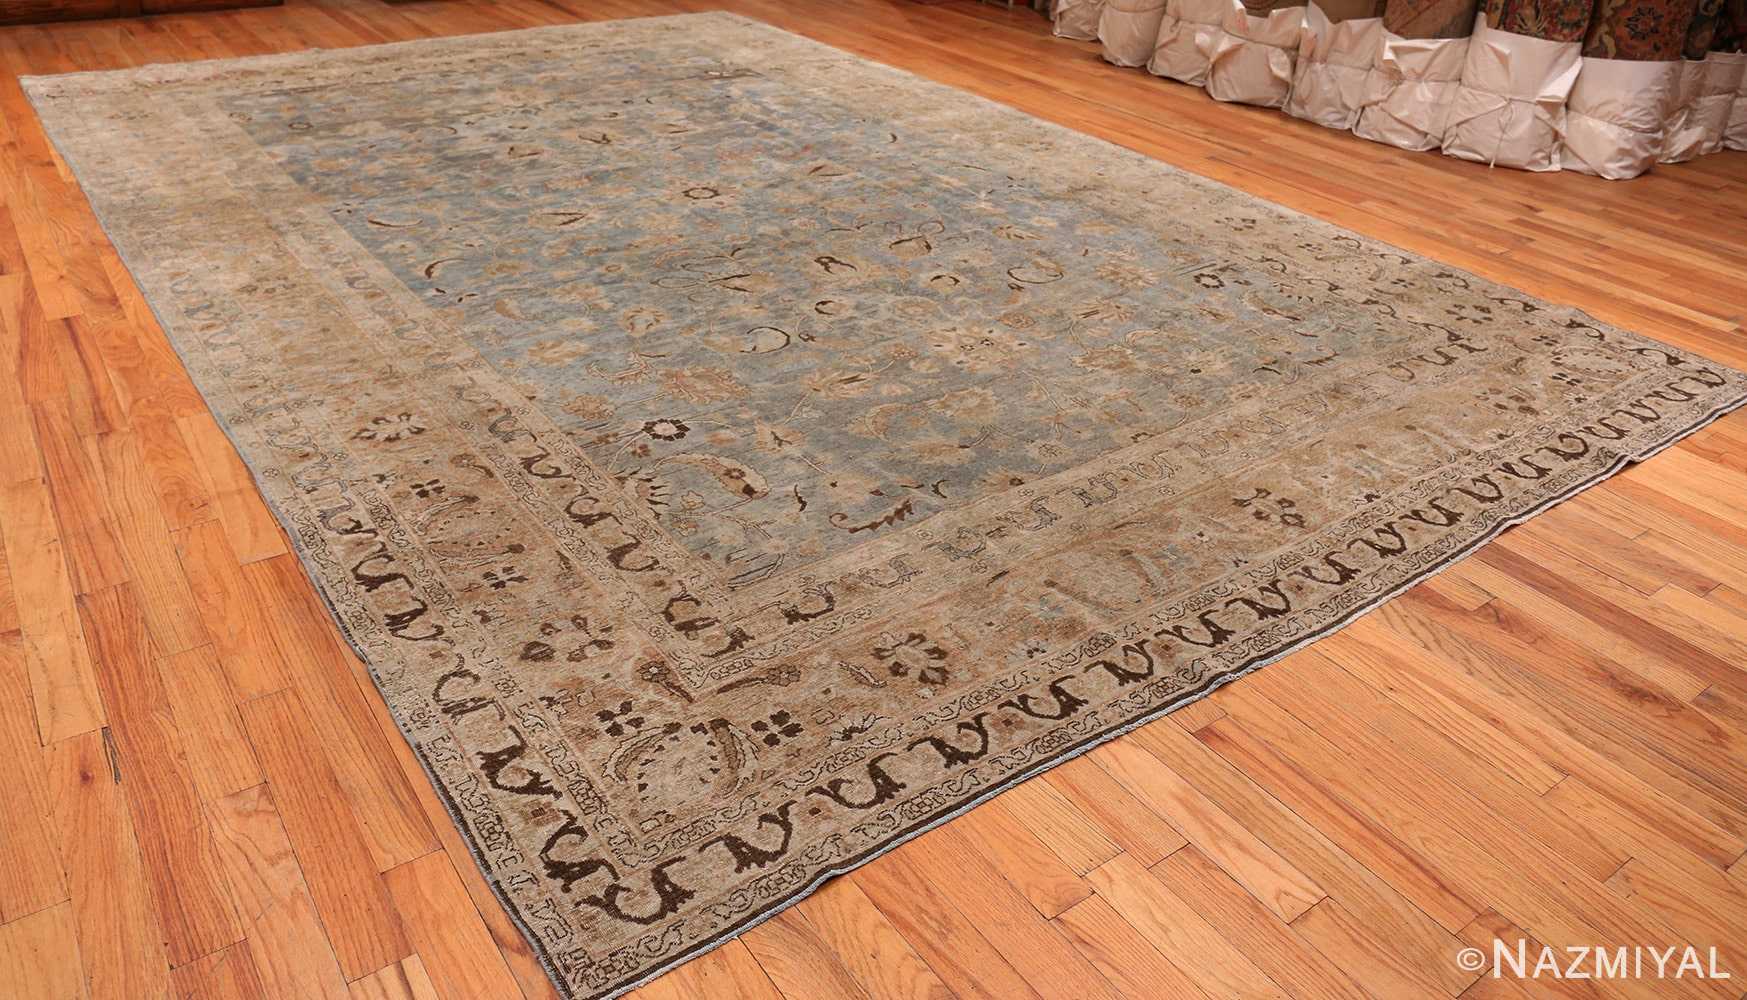 A full picture of the antique persian khorassan rug #49843 from Nazmiyal Antique Rugs NYC